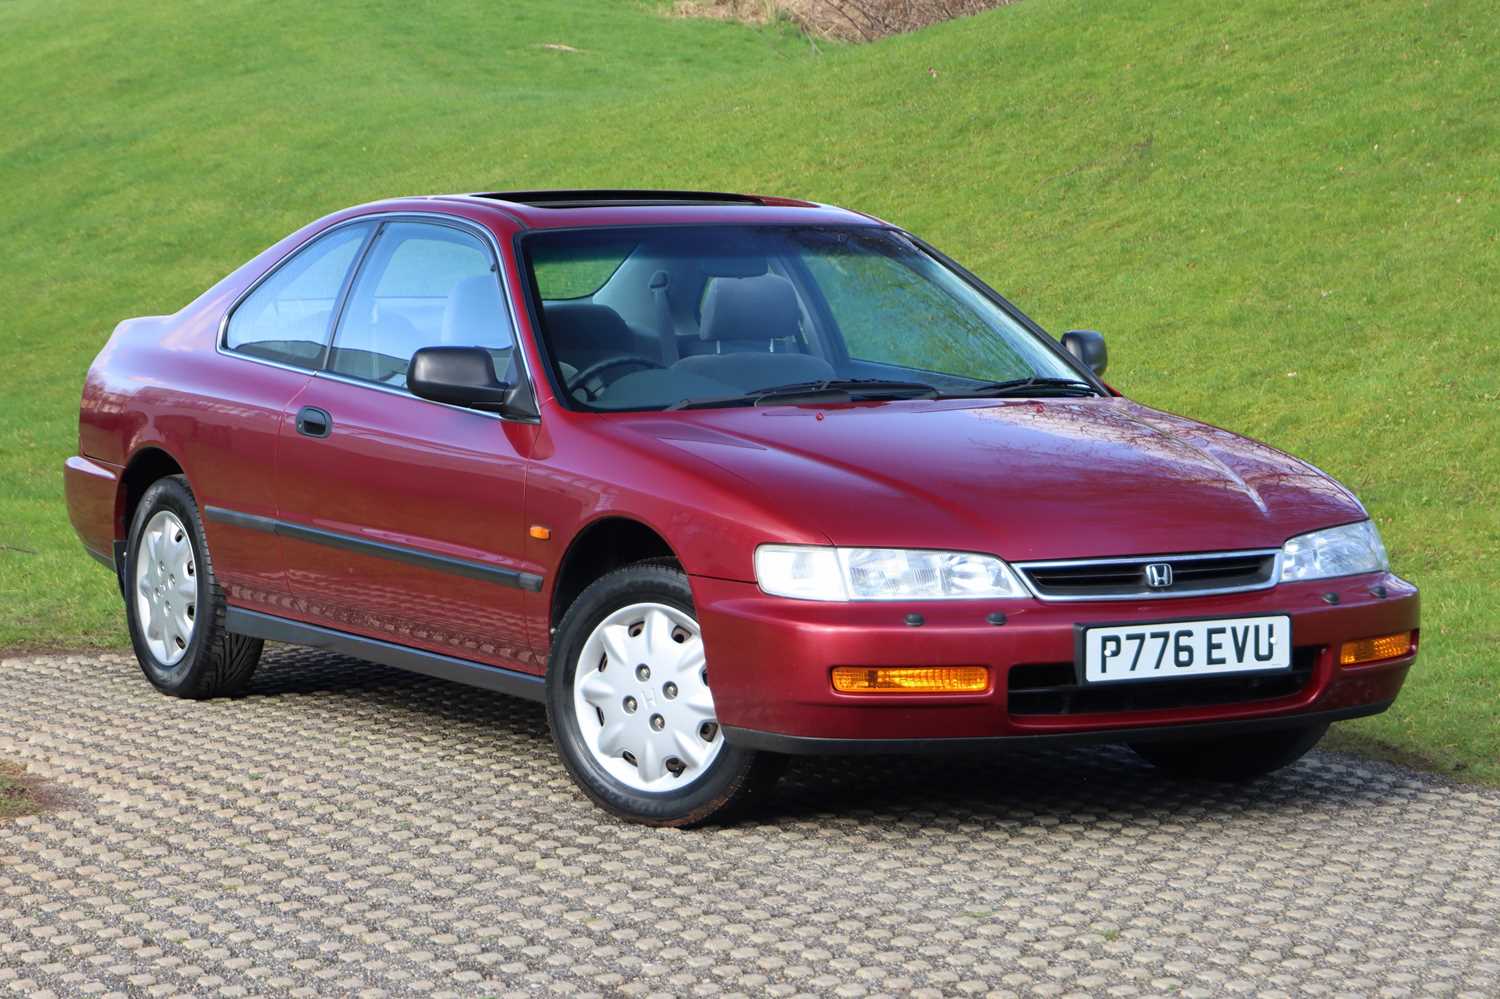 Used Honda Accord  1996 Accord for sale  Paranaque City Honda Accord  sales  Honda Accord Price 238000  Used cars